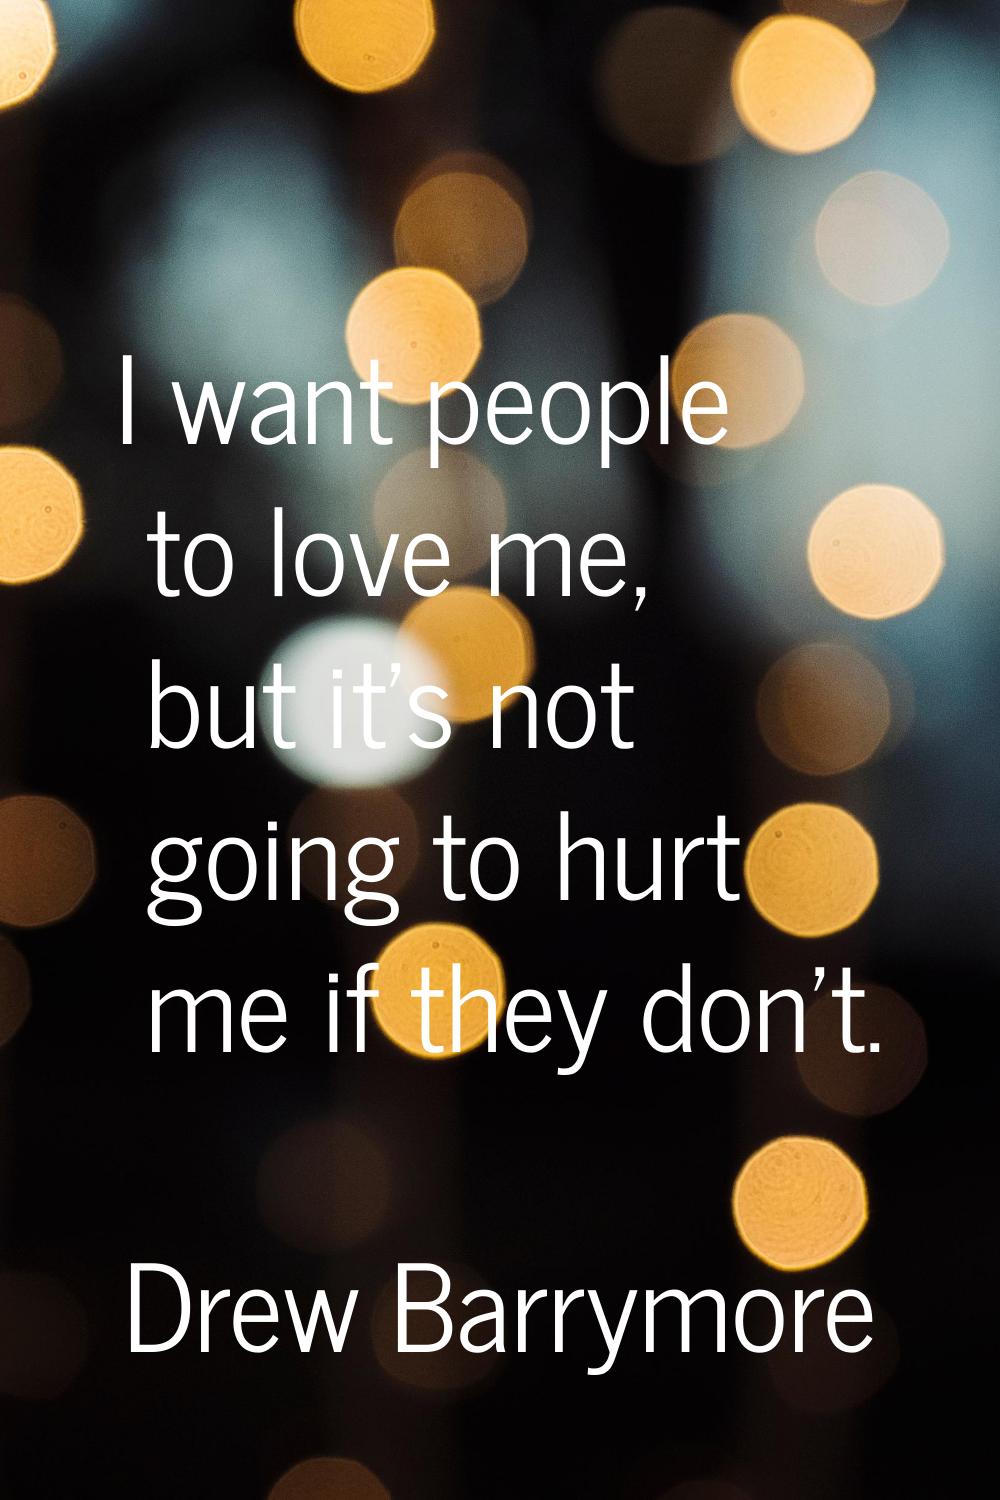 I want people to love me, but it's not going to hurt me if they don't.